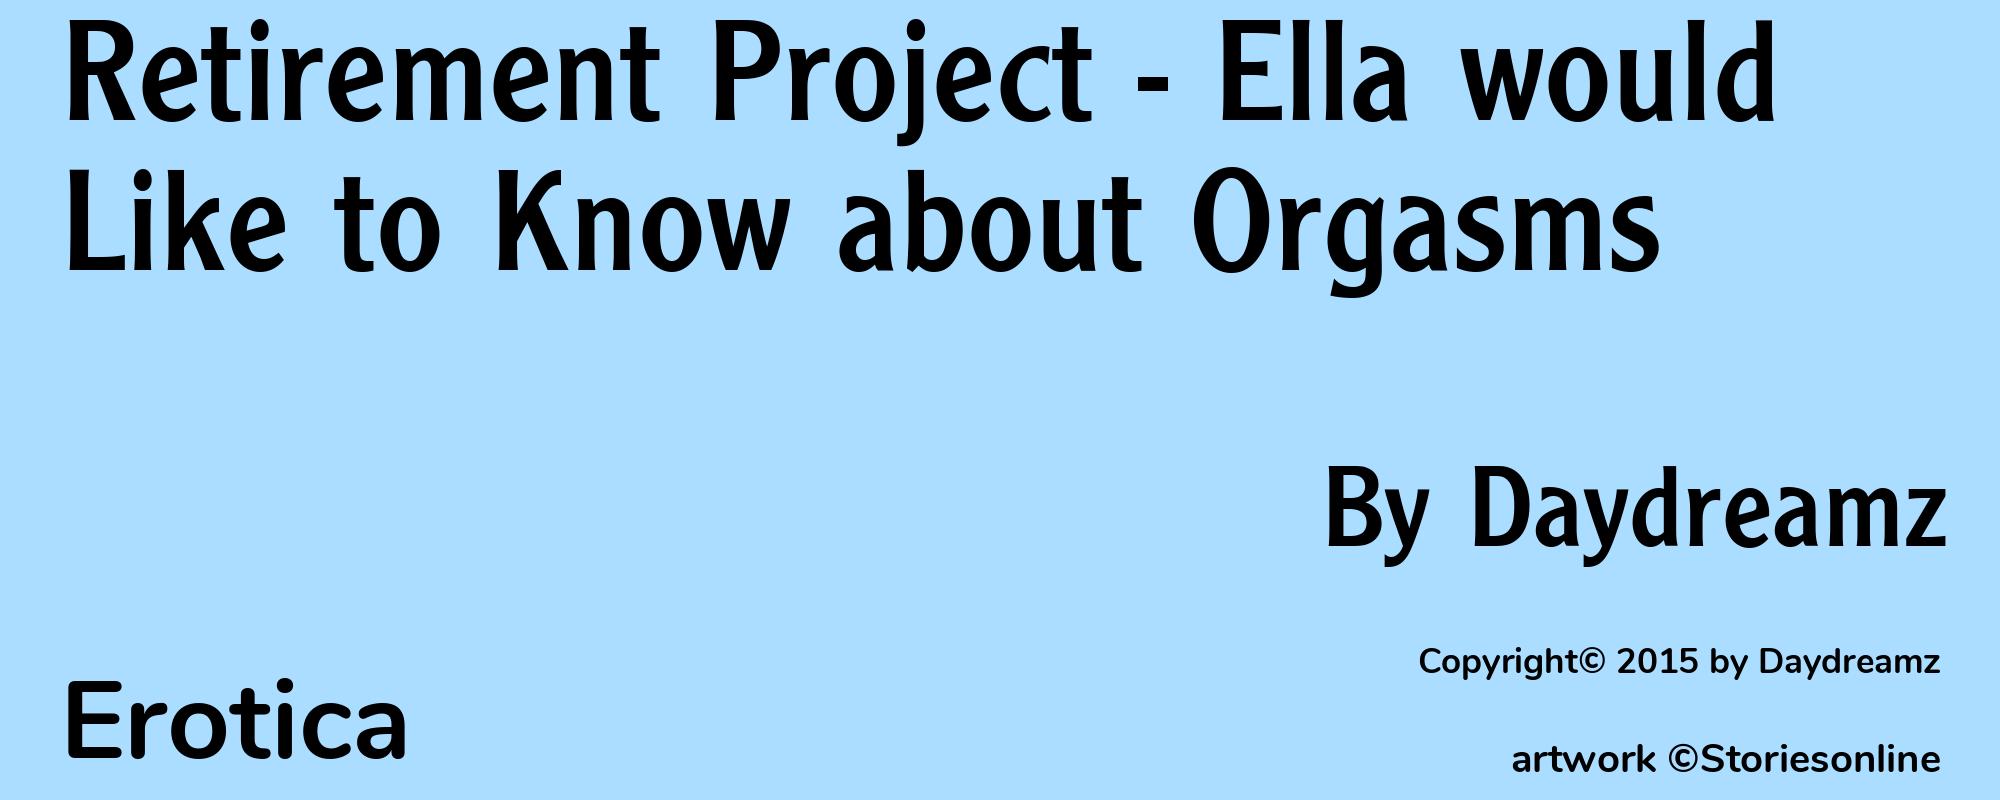 Retirement Project - Ella would Like to Know about Orgasms - Cover